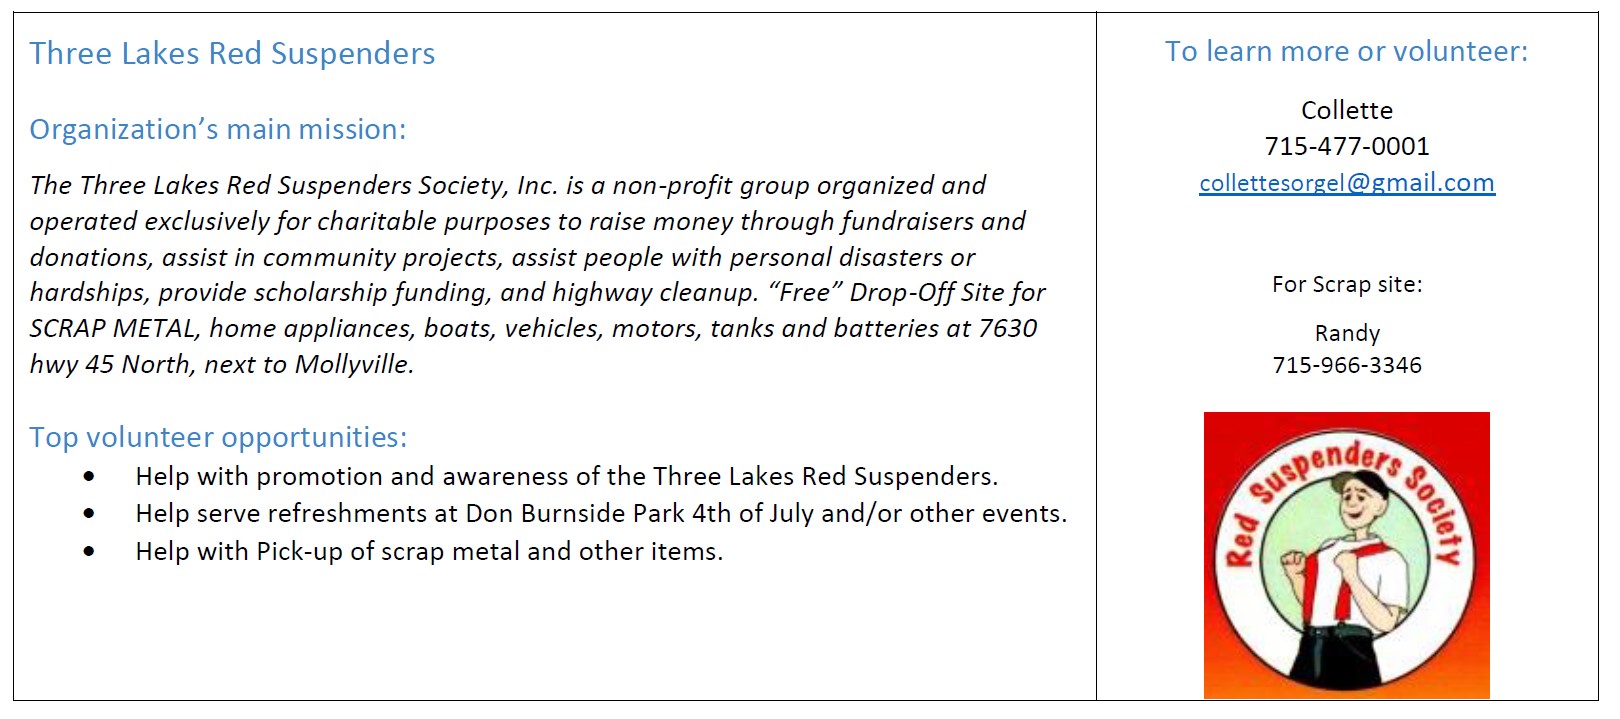 Volunteer opportunities with the Three Lakes Red Suspenders